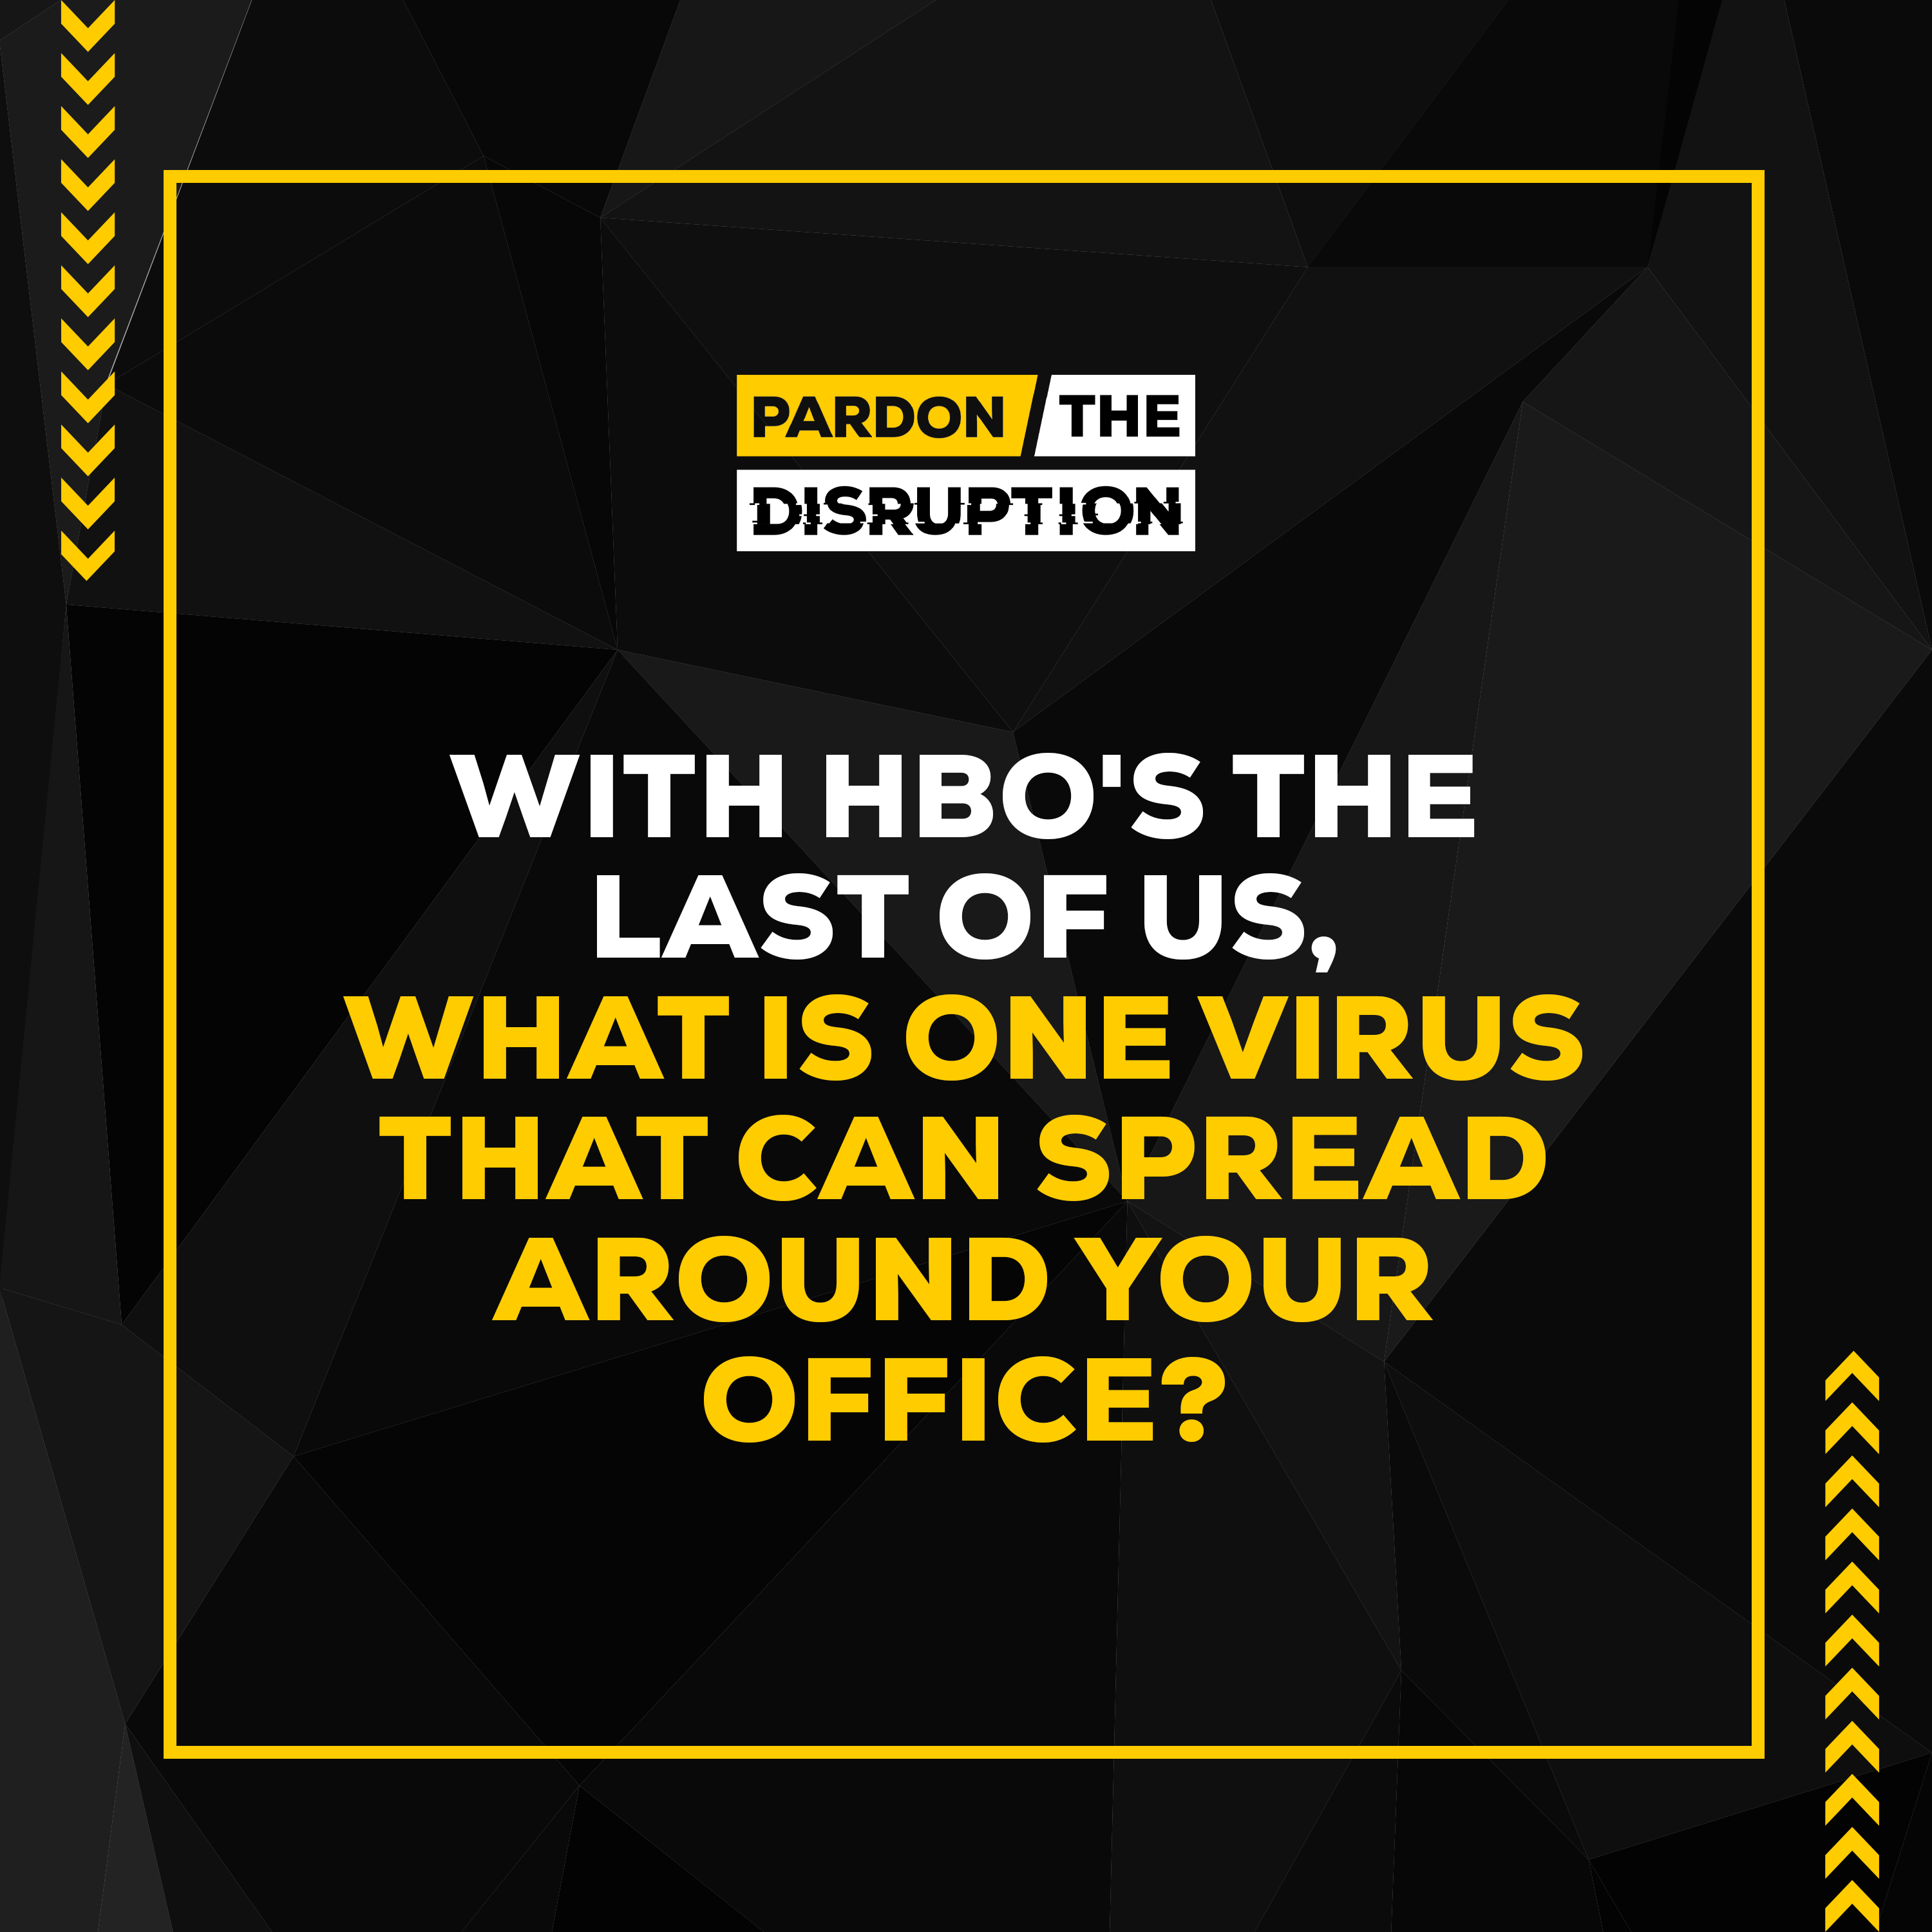 Pardon The Disruption. With HBO's The Last Of Us, What Is One Virus That Can Spread Around Your Office?